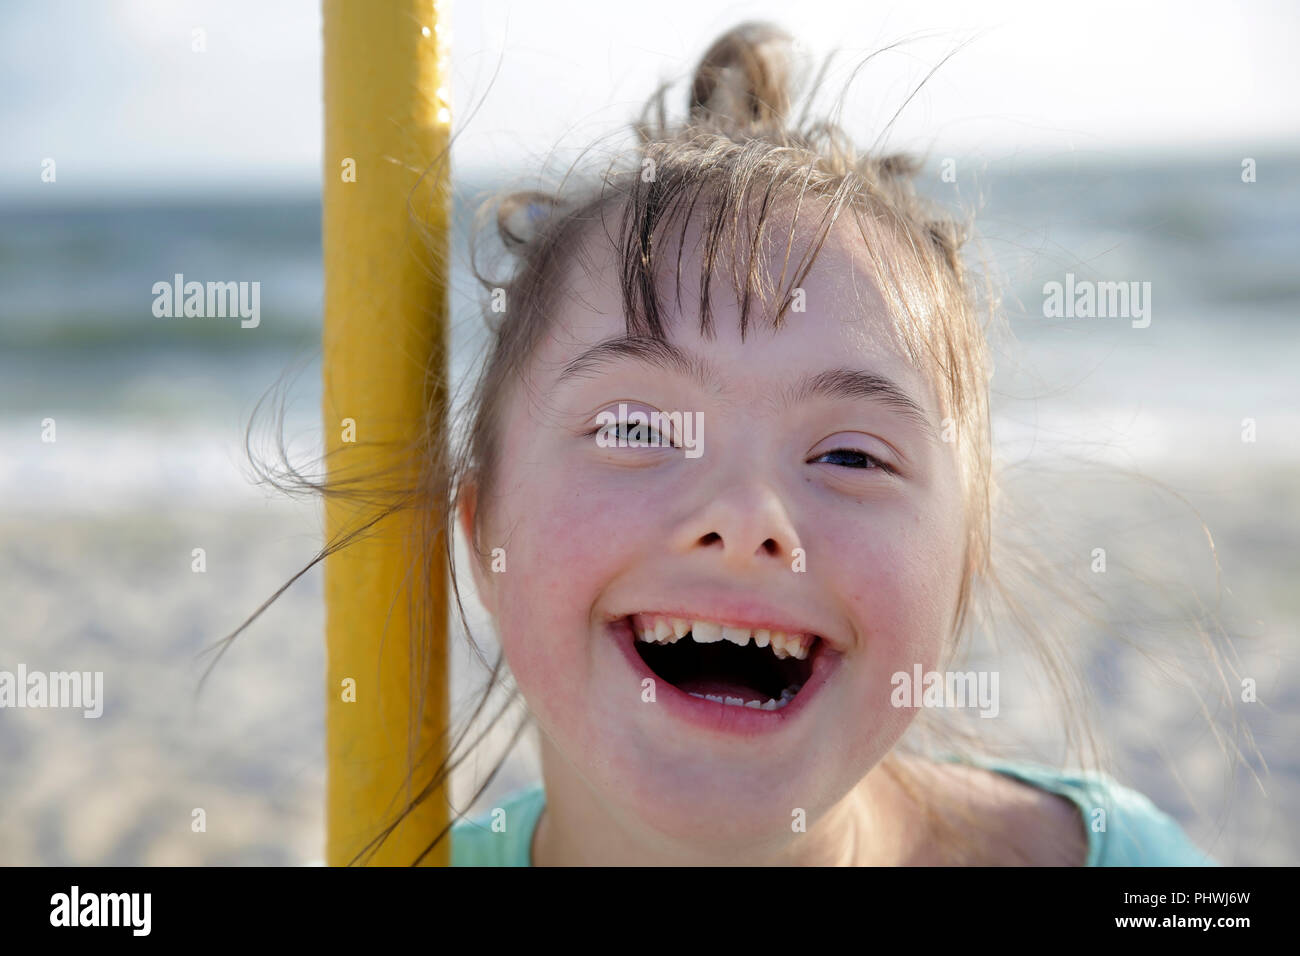 Portrait of down syndrome girl smiling Stock Photo